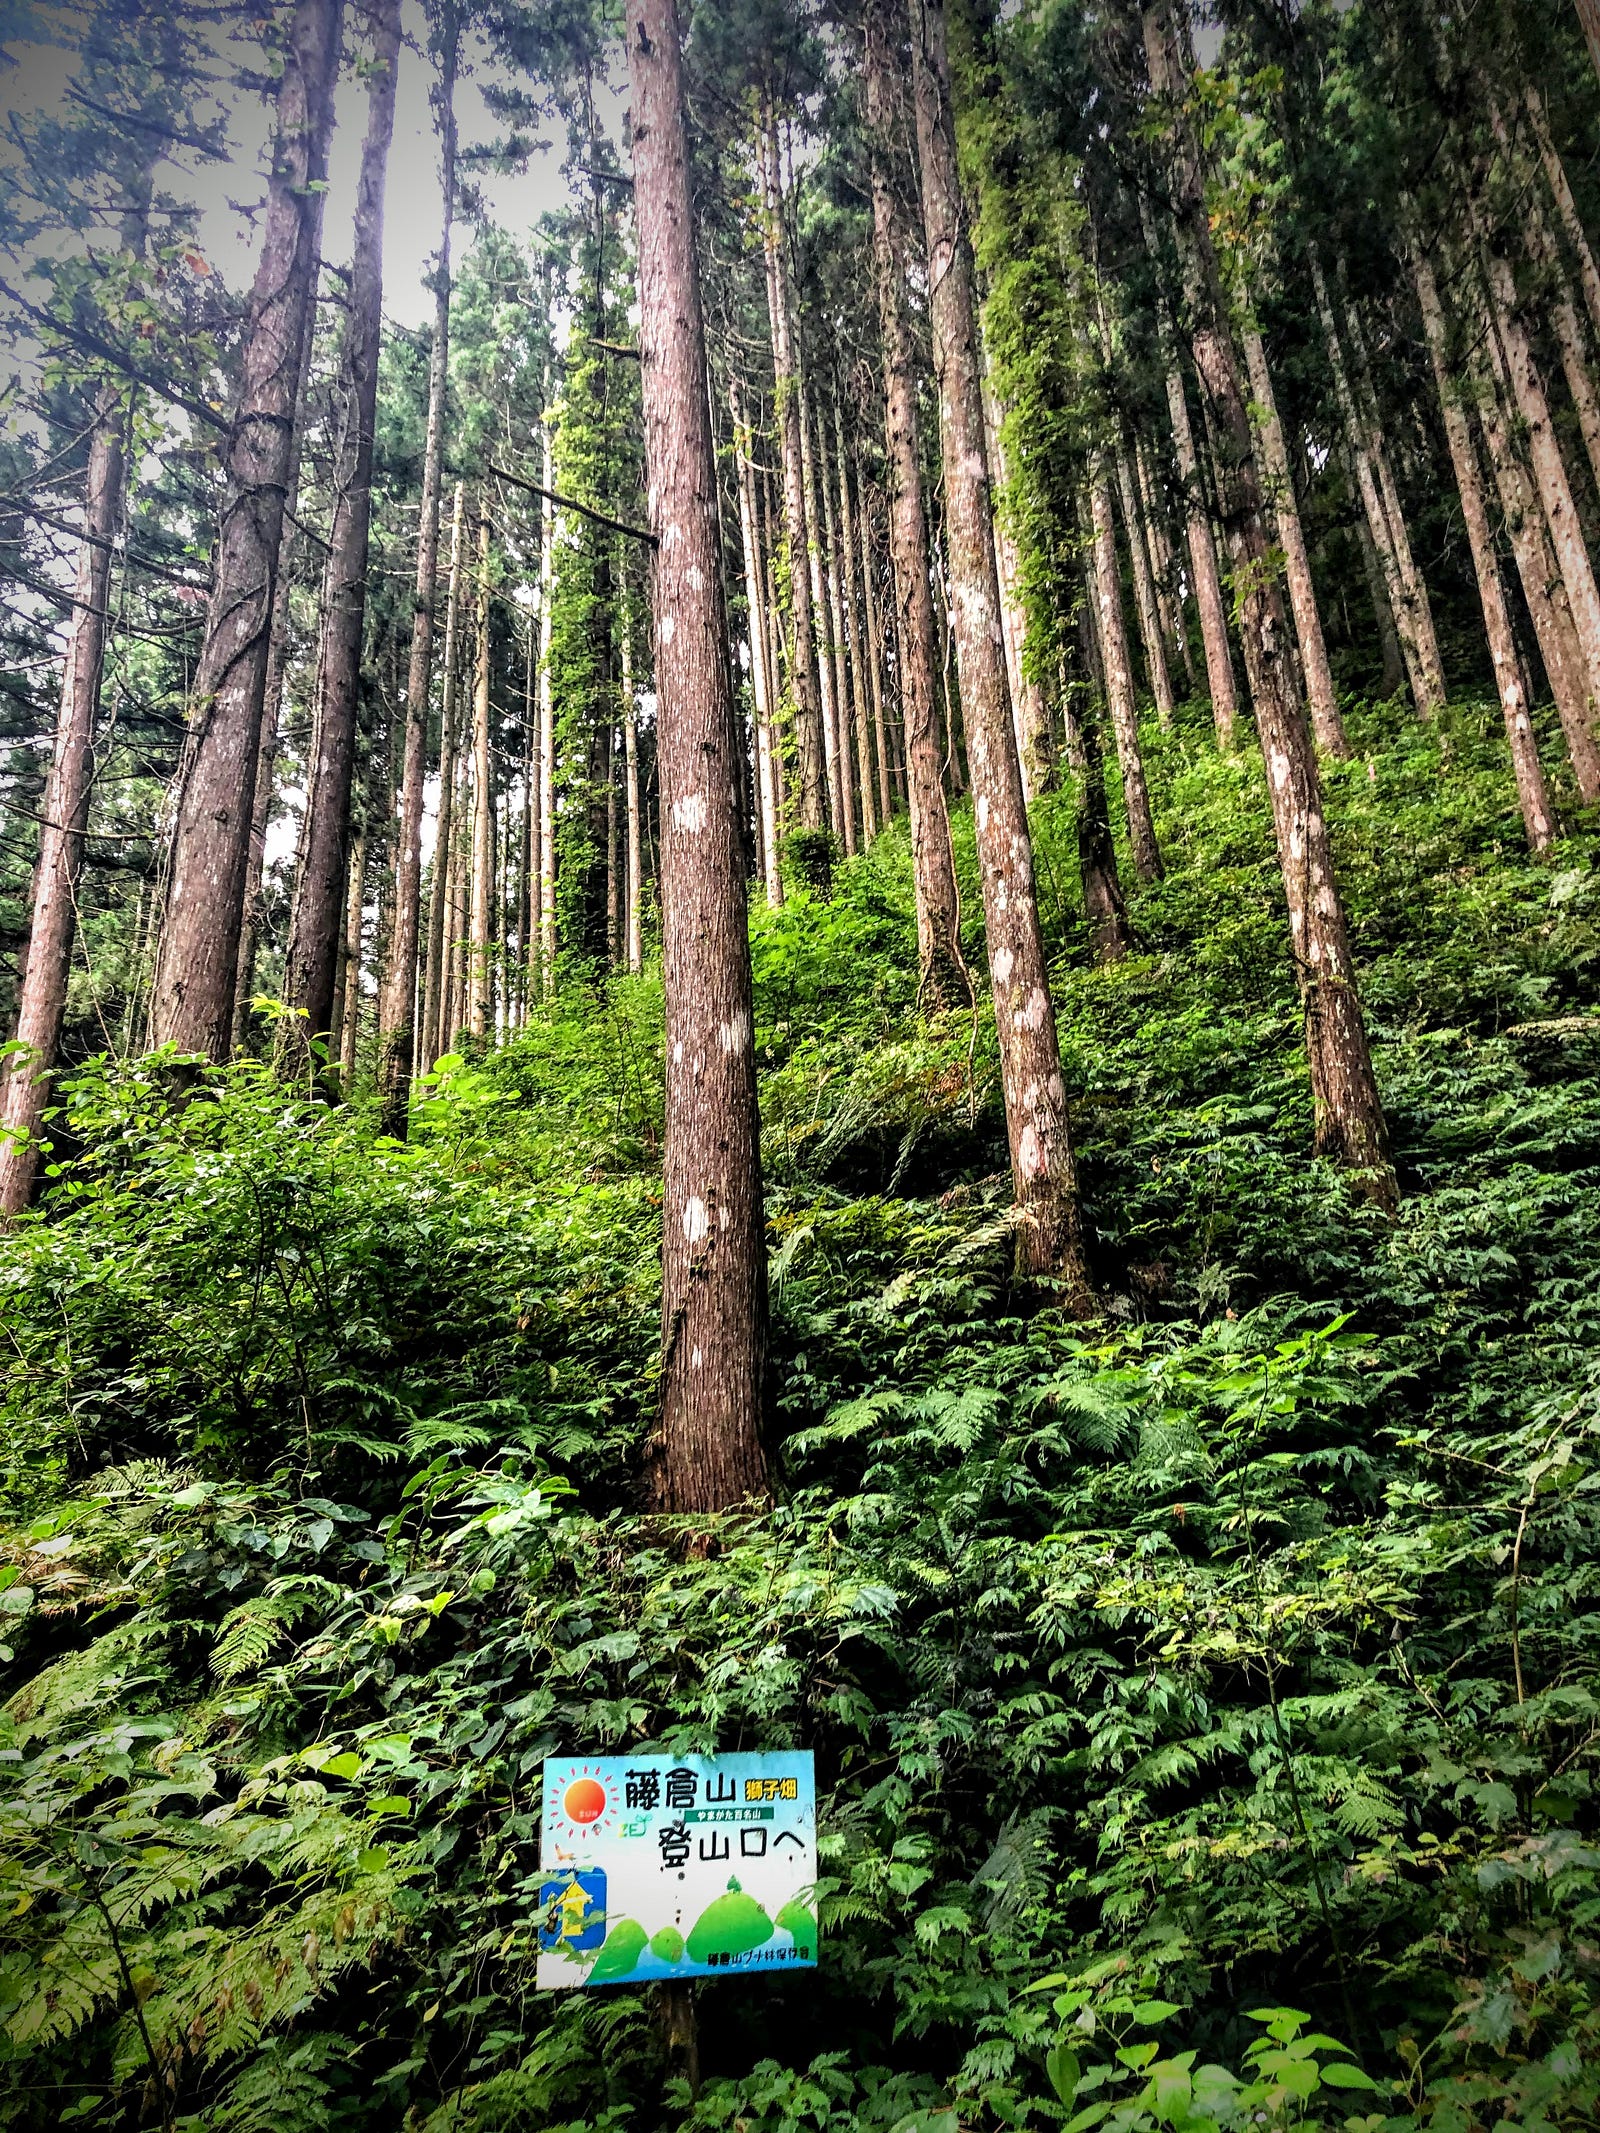 Tall cedar trees and a small sign below showing the path up Mt. Fujikura